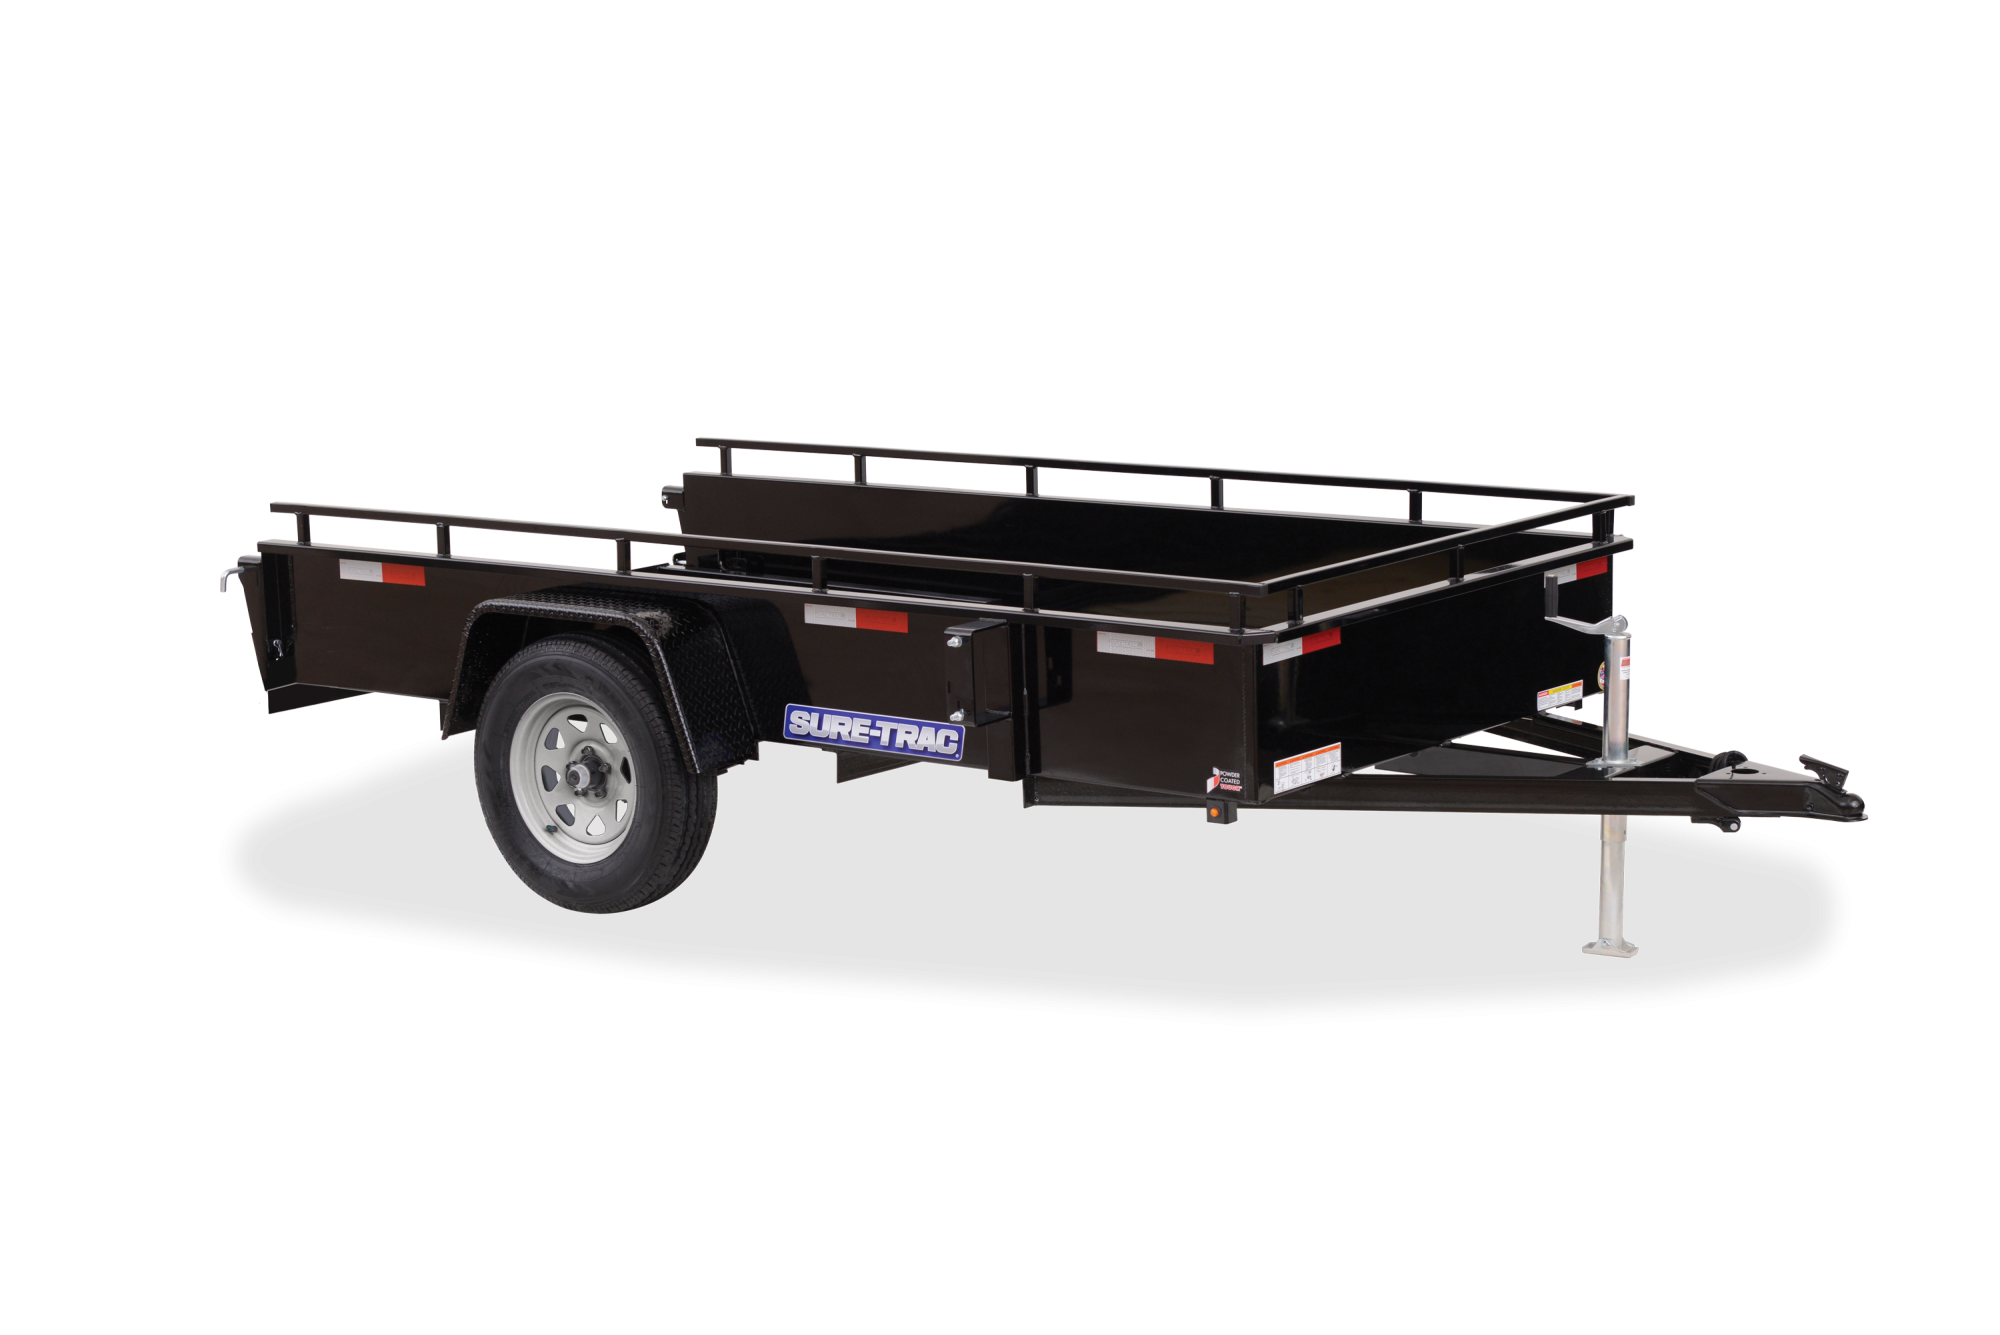 Sure-Trac | Steel High Side Utility | Image | Front view, tilted, Single Axle Steel High Side Utility with reflective tape